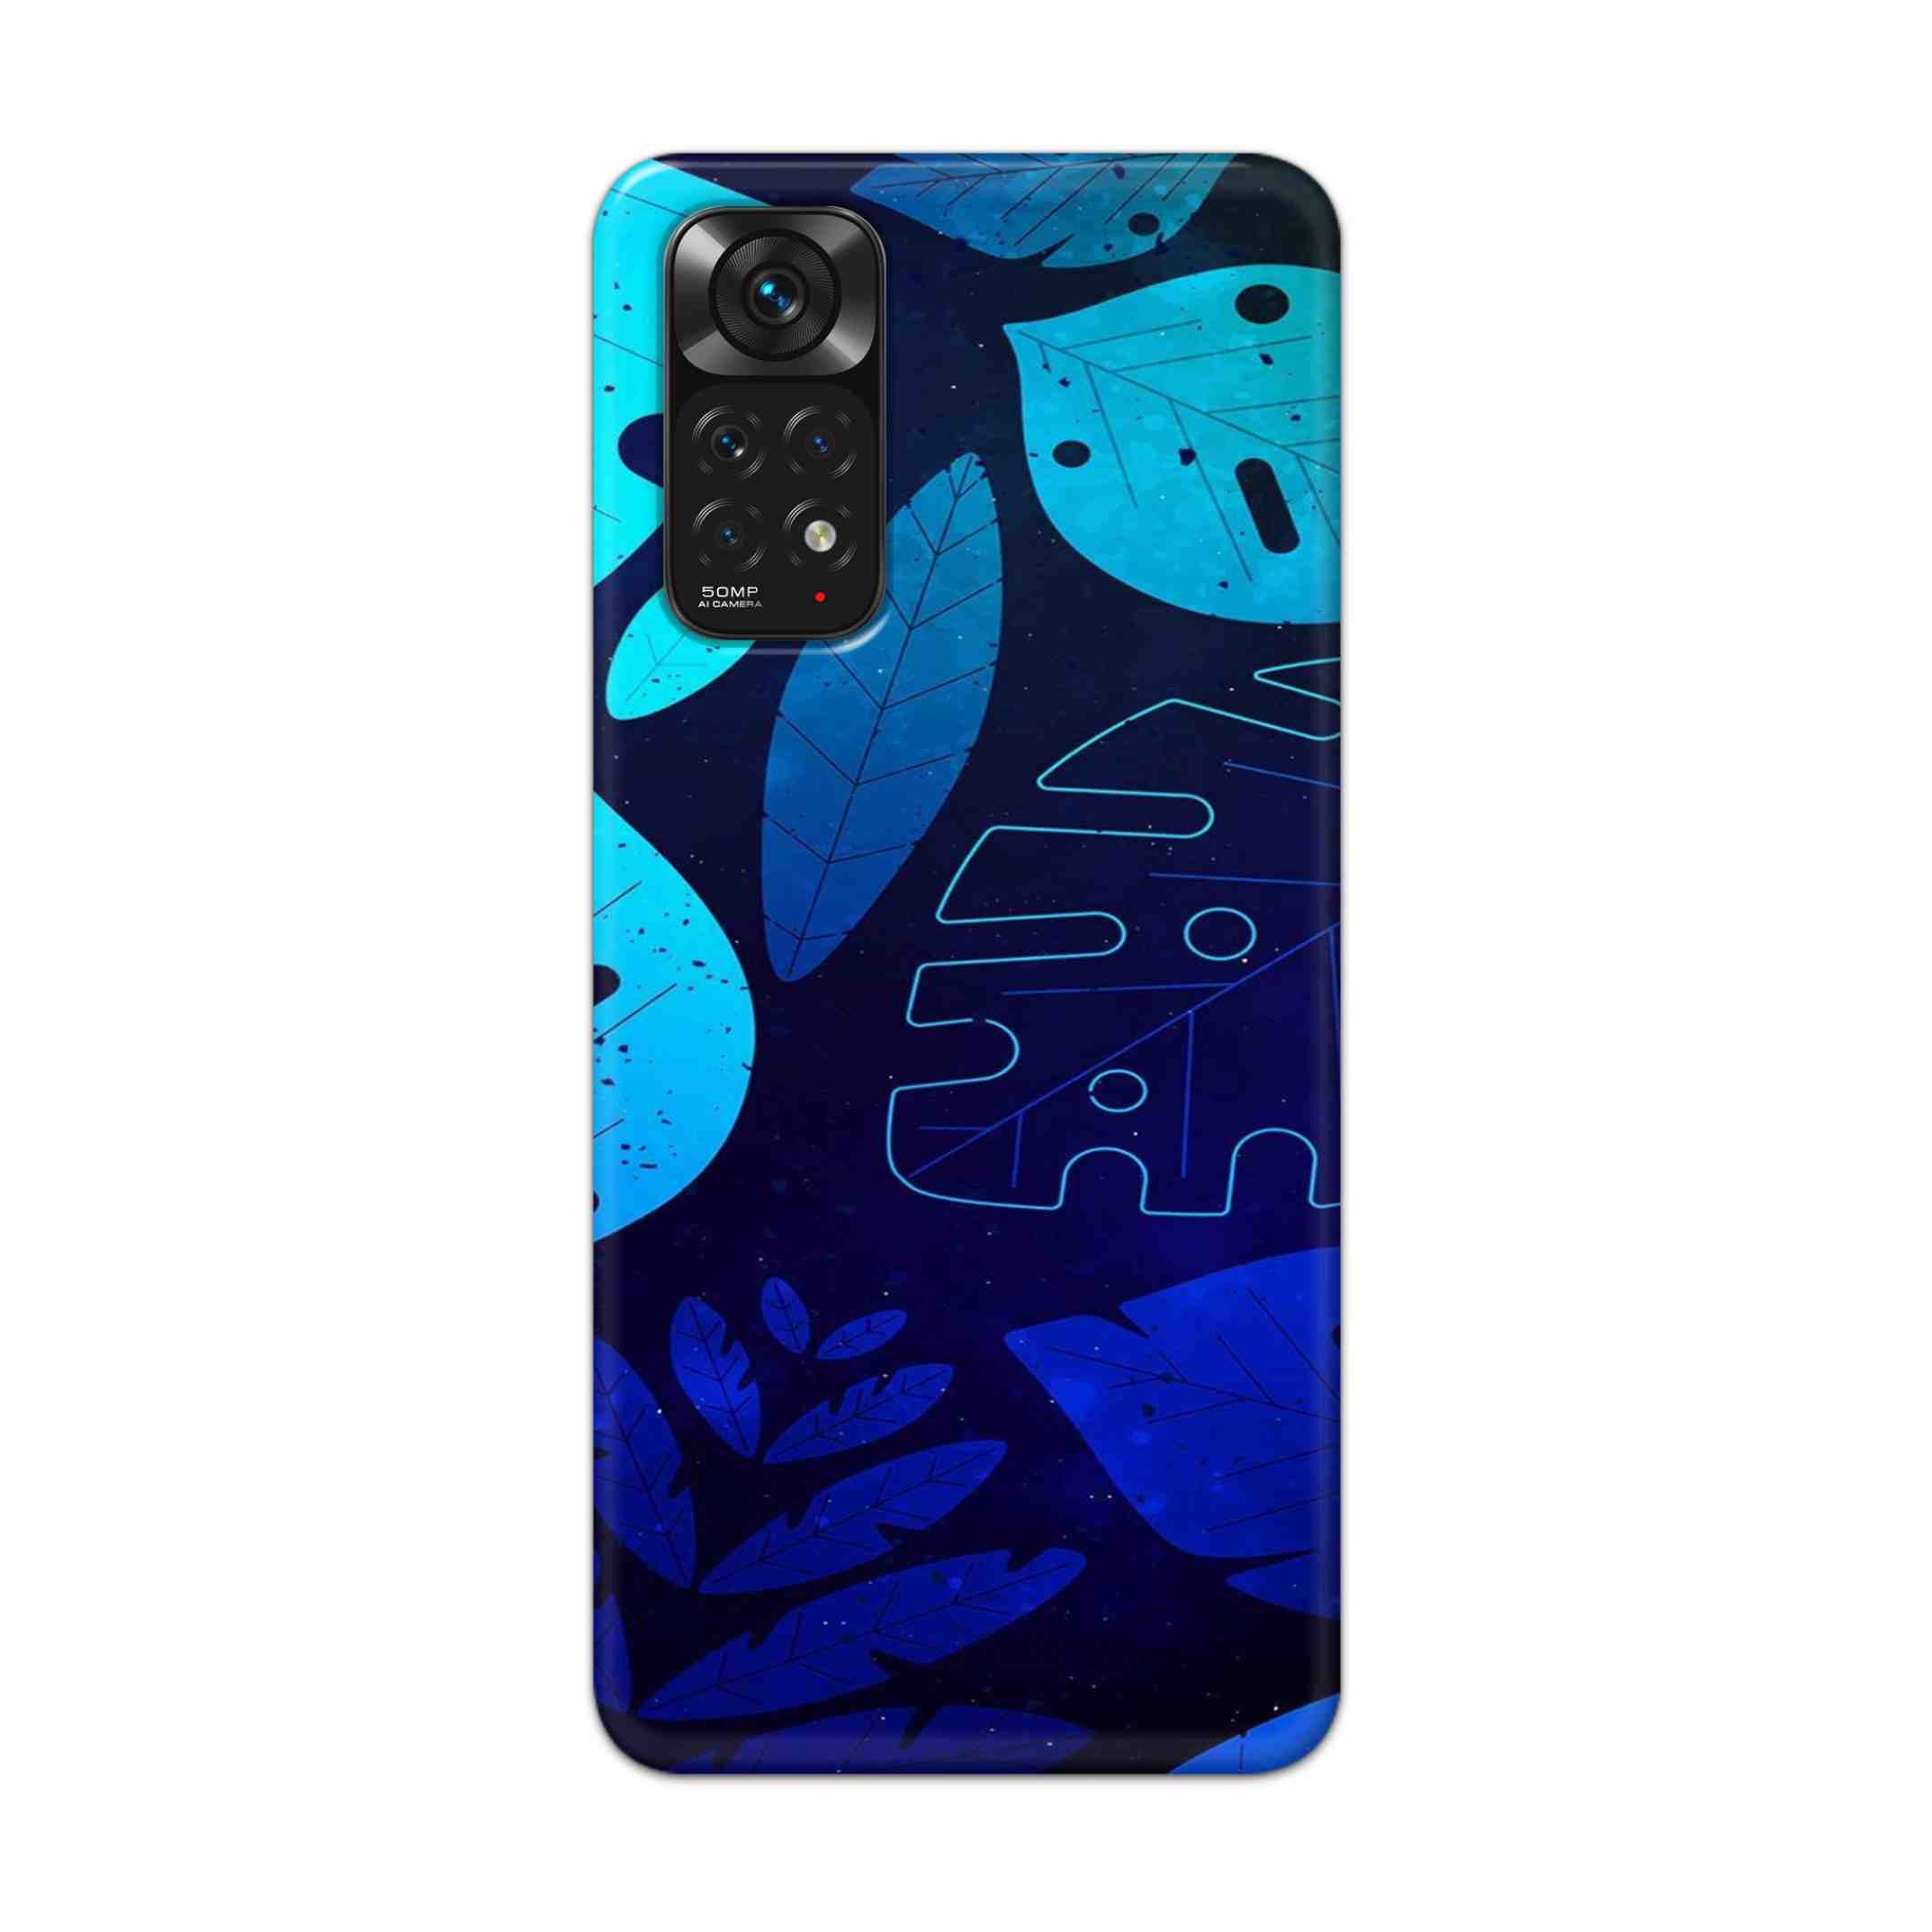 Buy Neon Leaf Hard Back Mobile Phone Case Cover For Redmi Note 11 Online